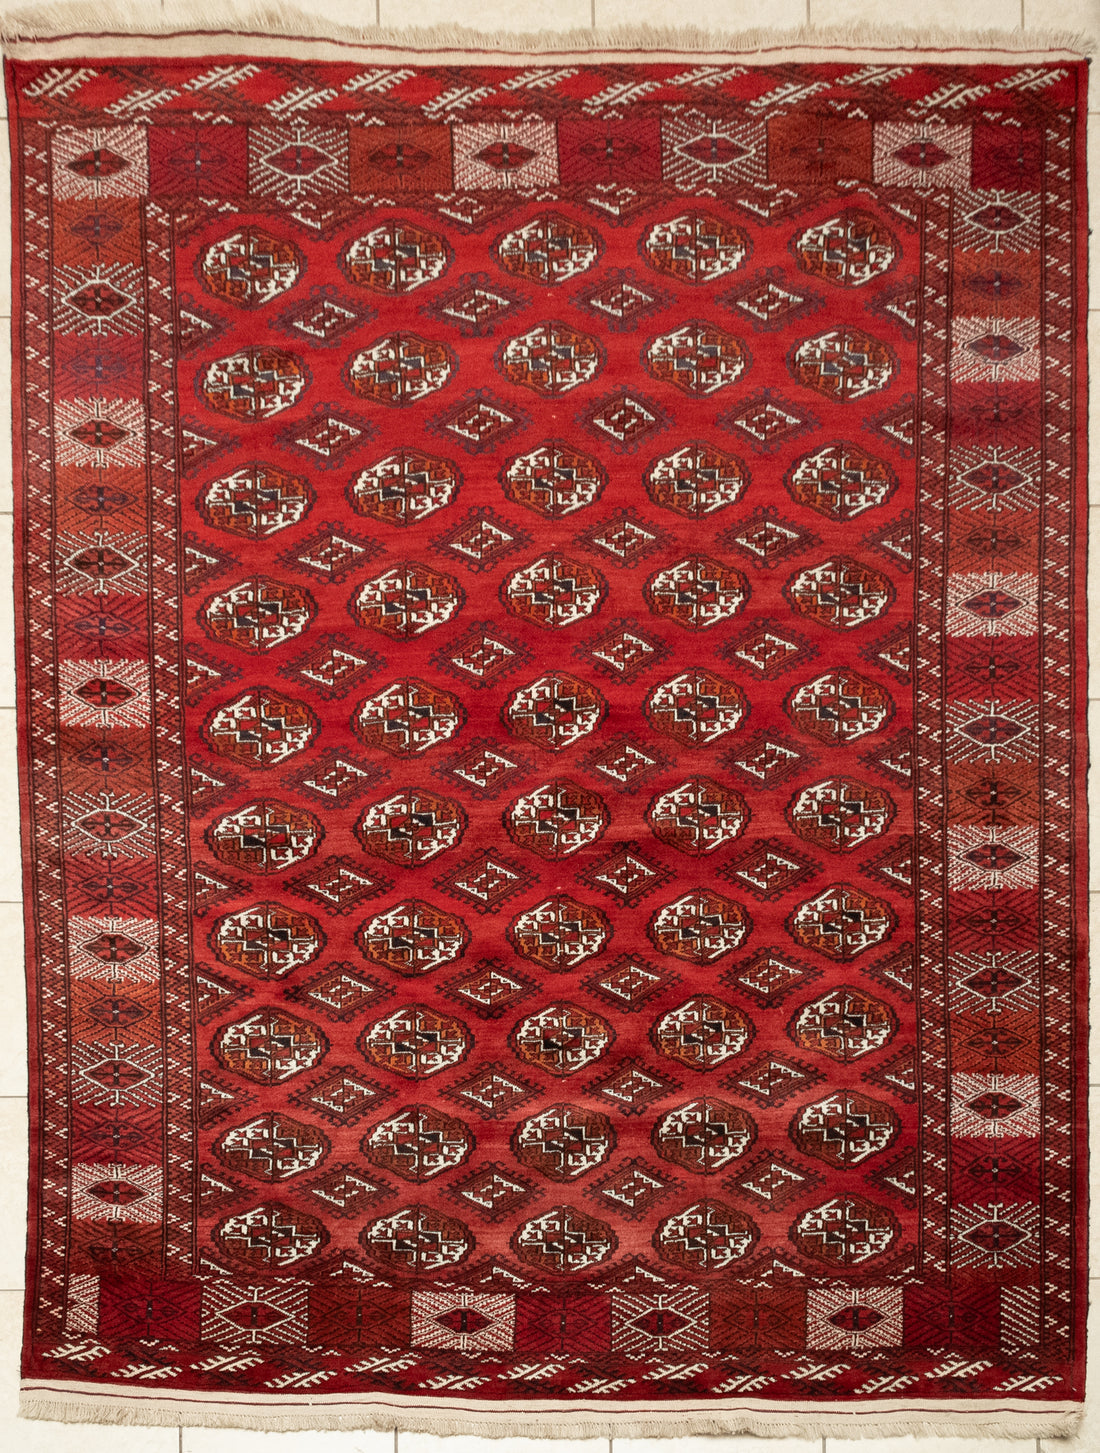 Hand-Knotted Wool Turkmen Rug 10'4" x 7'6"